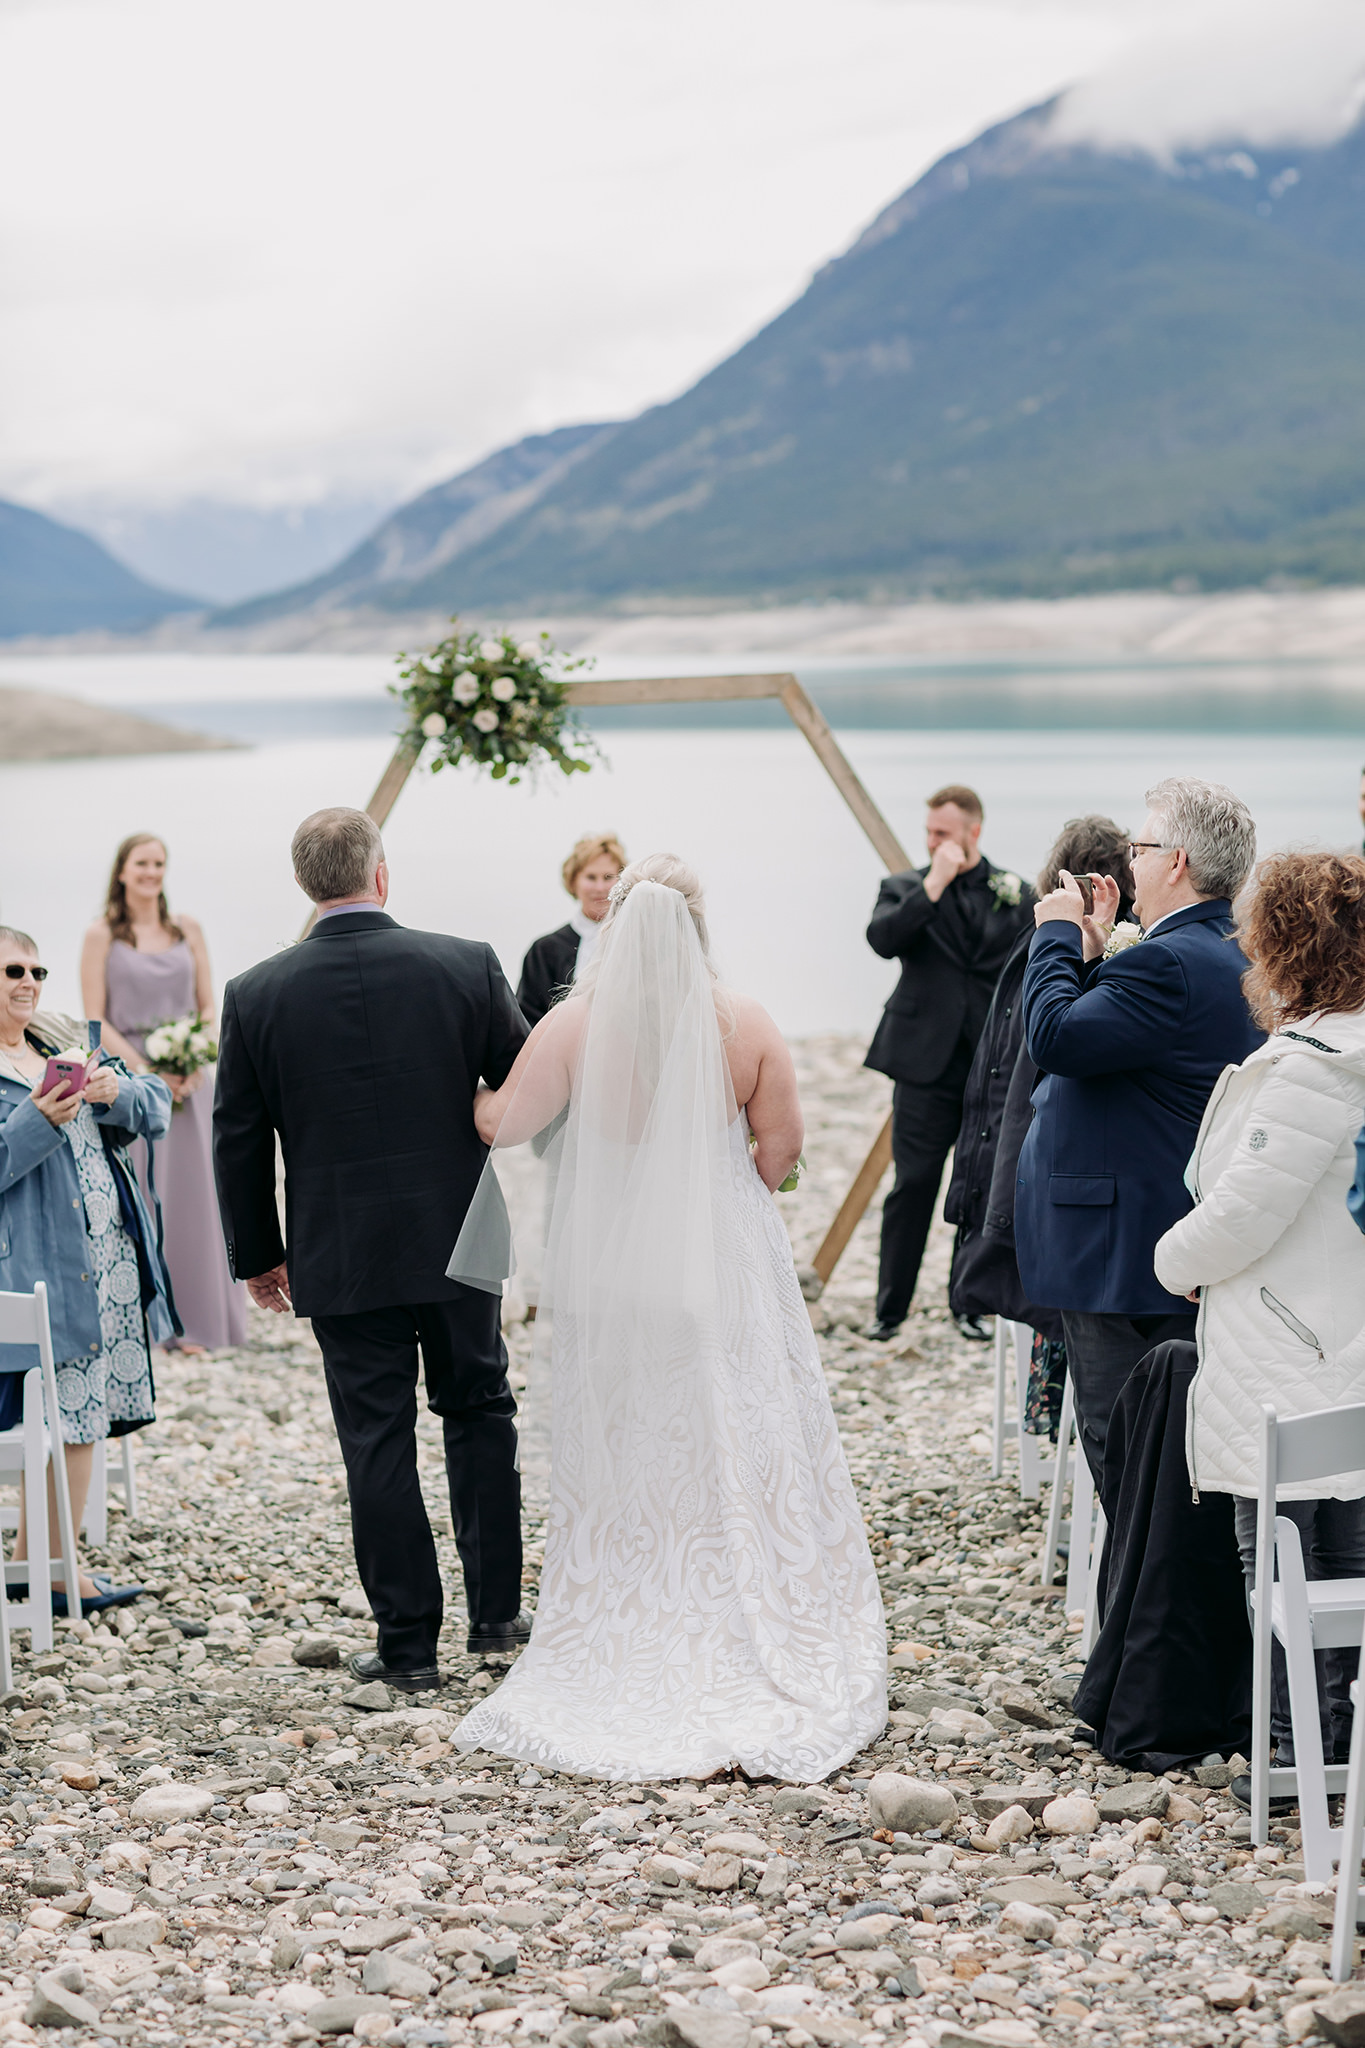 Abraham Lake Spring Mountain wedding with outdoor wedding ceremony with blue waters & mountains in the distance